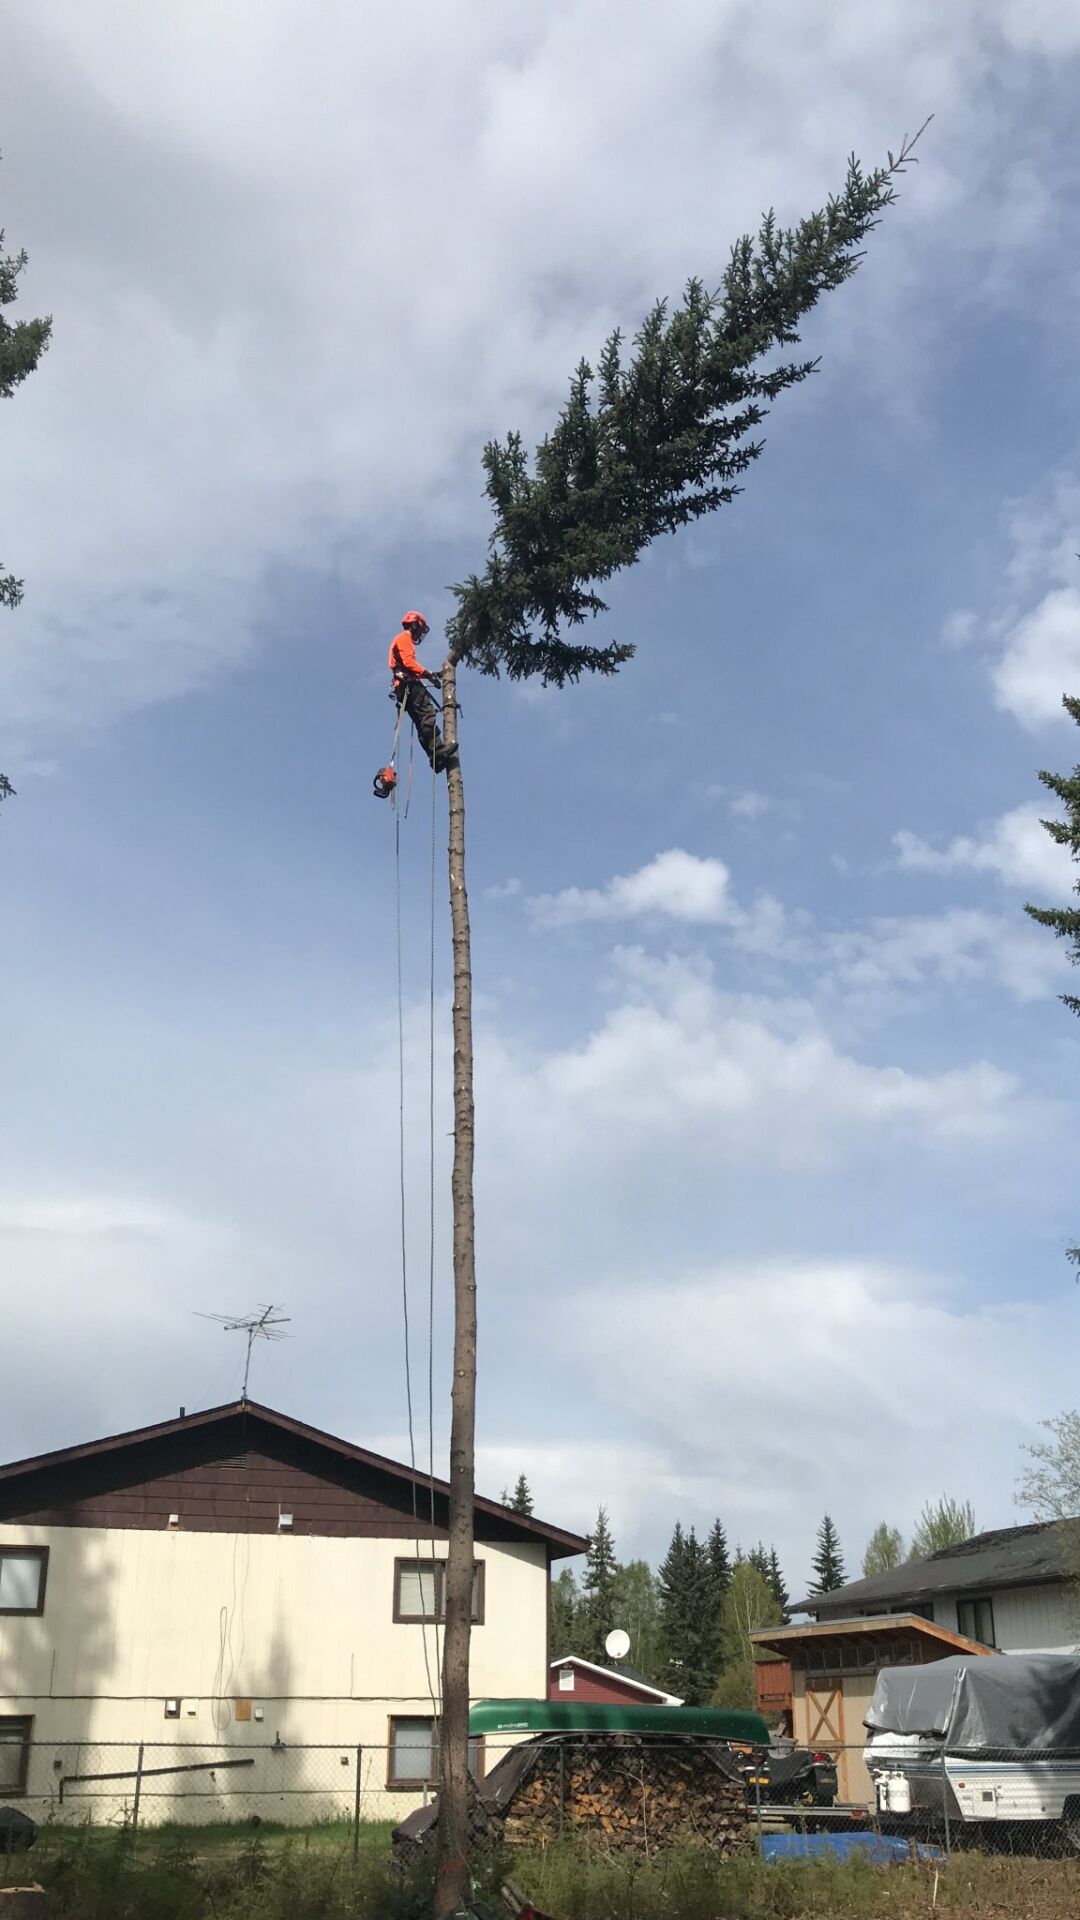 Making the cut: Husband and wife team tackle trees together | Local  Business | newsminer.com